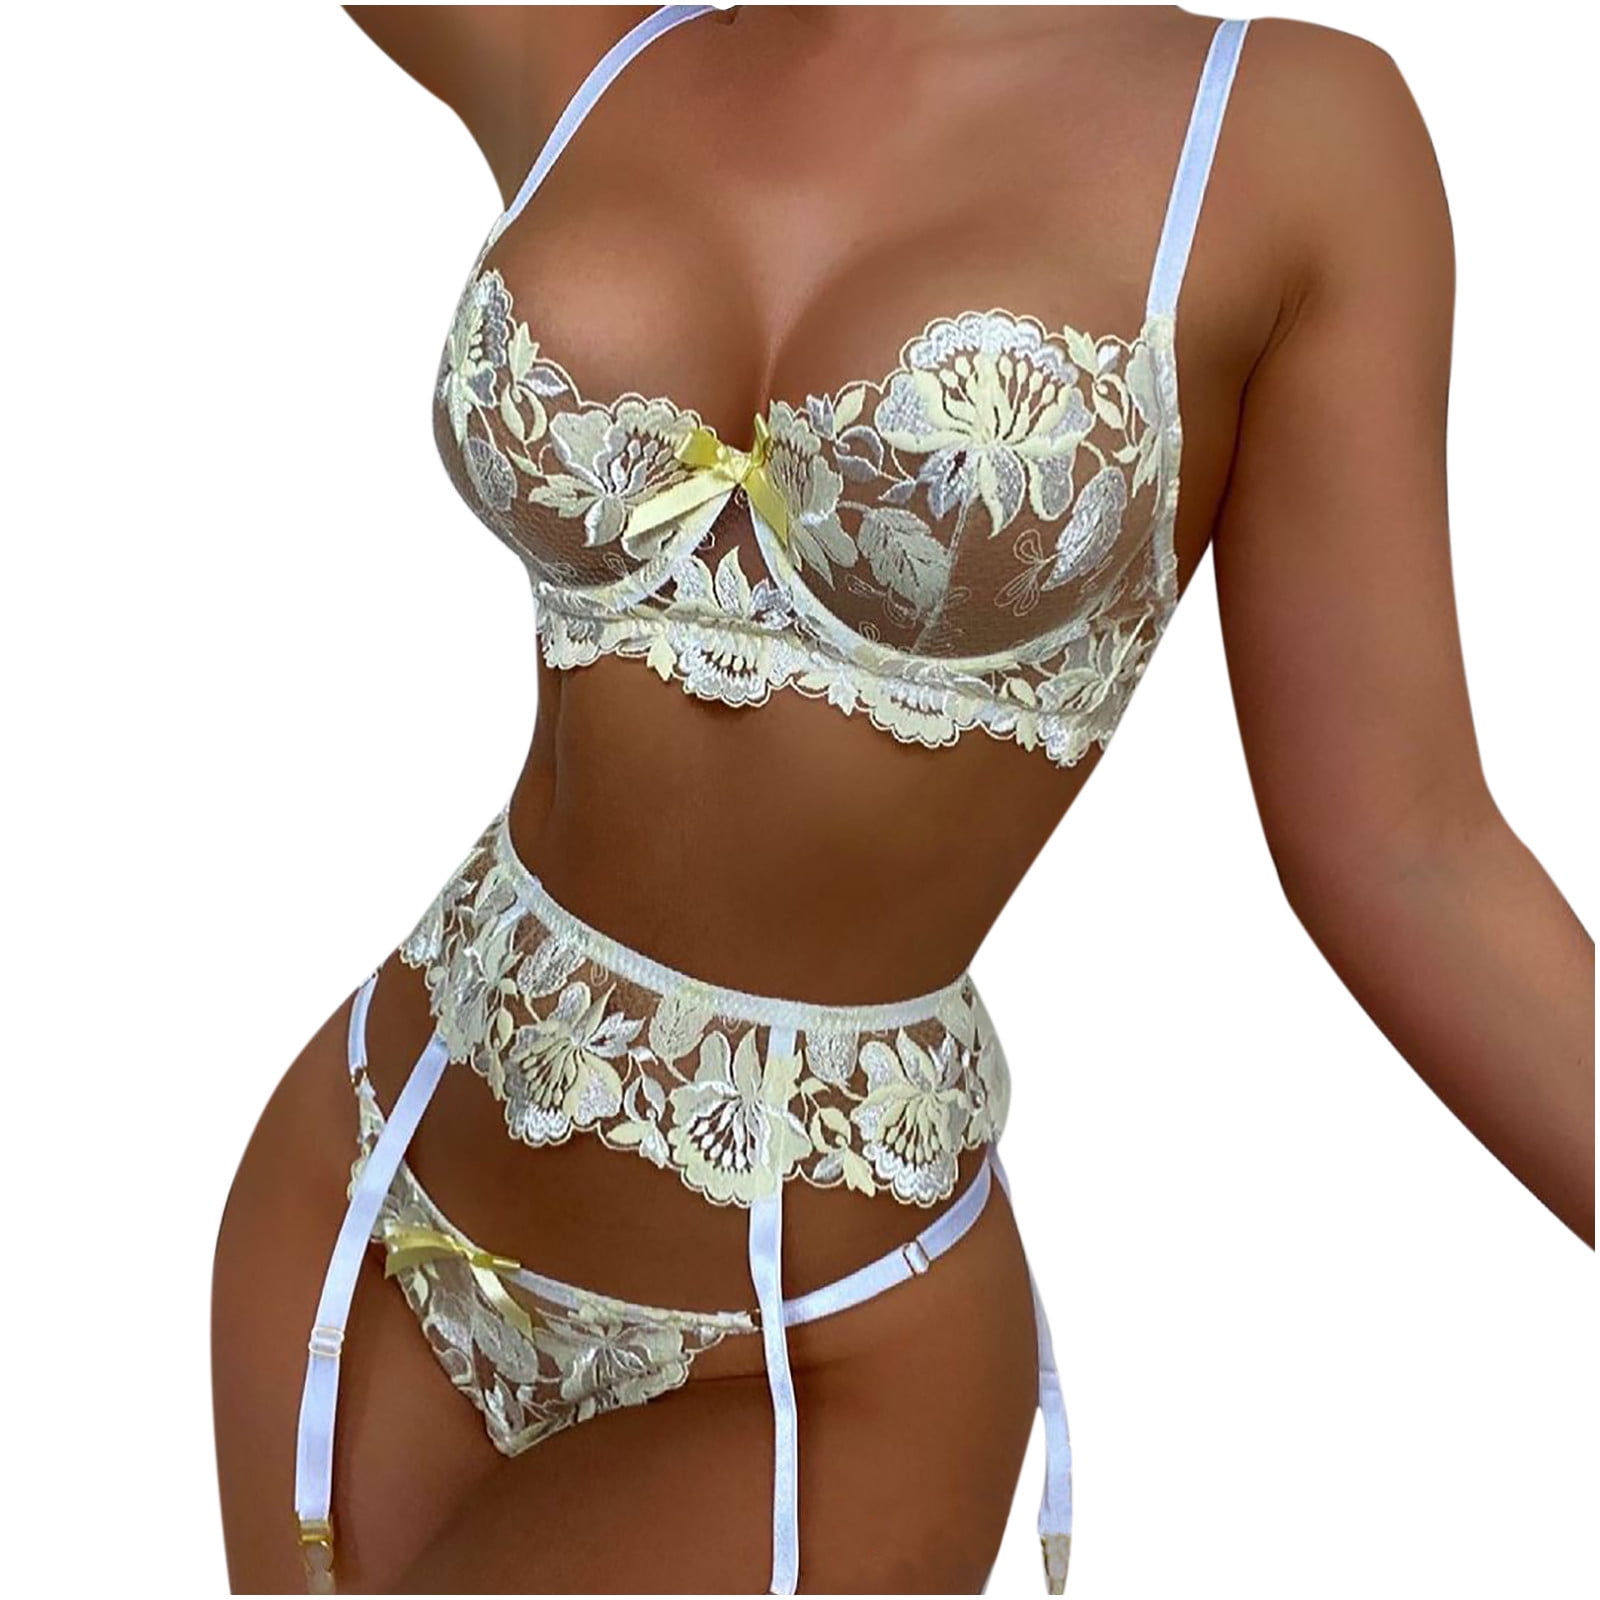 Yellow Lace Embroidered Flower Yellow Lace Bra Set Push Up Lingerie For  Women, Comfortable And Sexy LJ201211200Z From Qljmw, $28.84